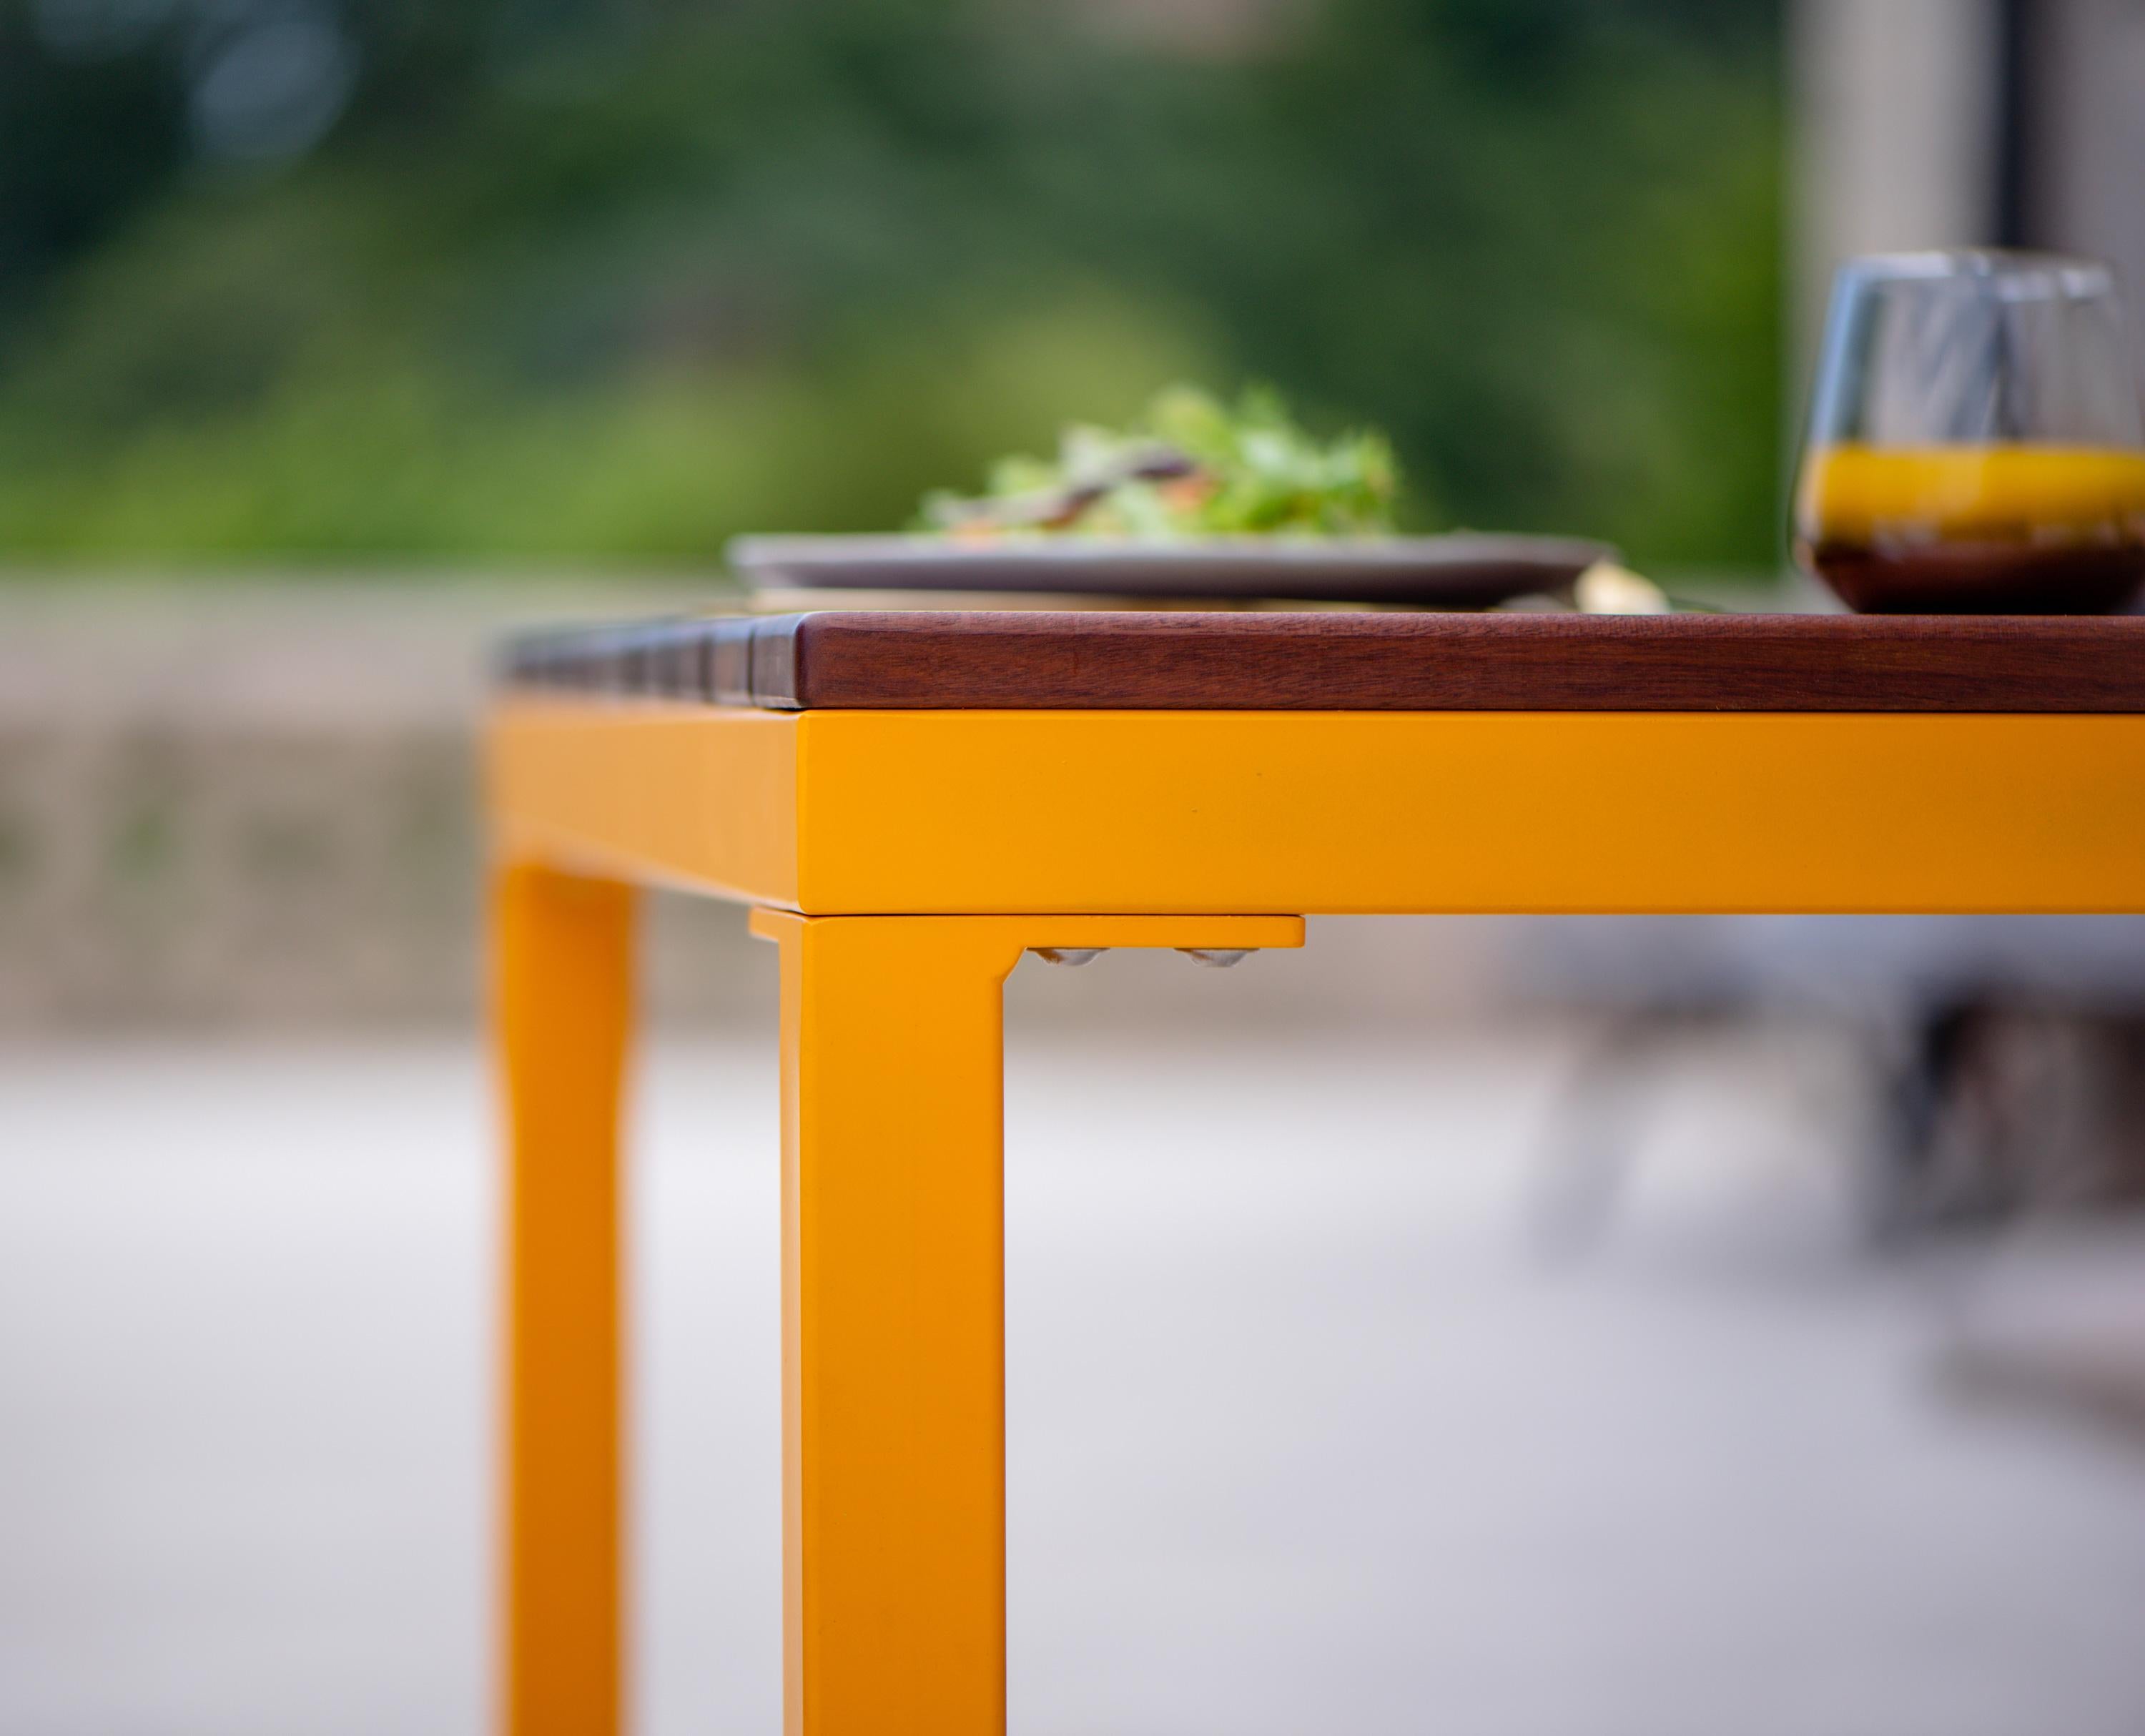 BICAtable Square XL is a sustainable steel table made for the outdoors from recycled and recyclable steel and finished with our premium selection of powder-coating colors, in this case in a bright yellow color, that transforms a Classic in something